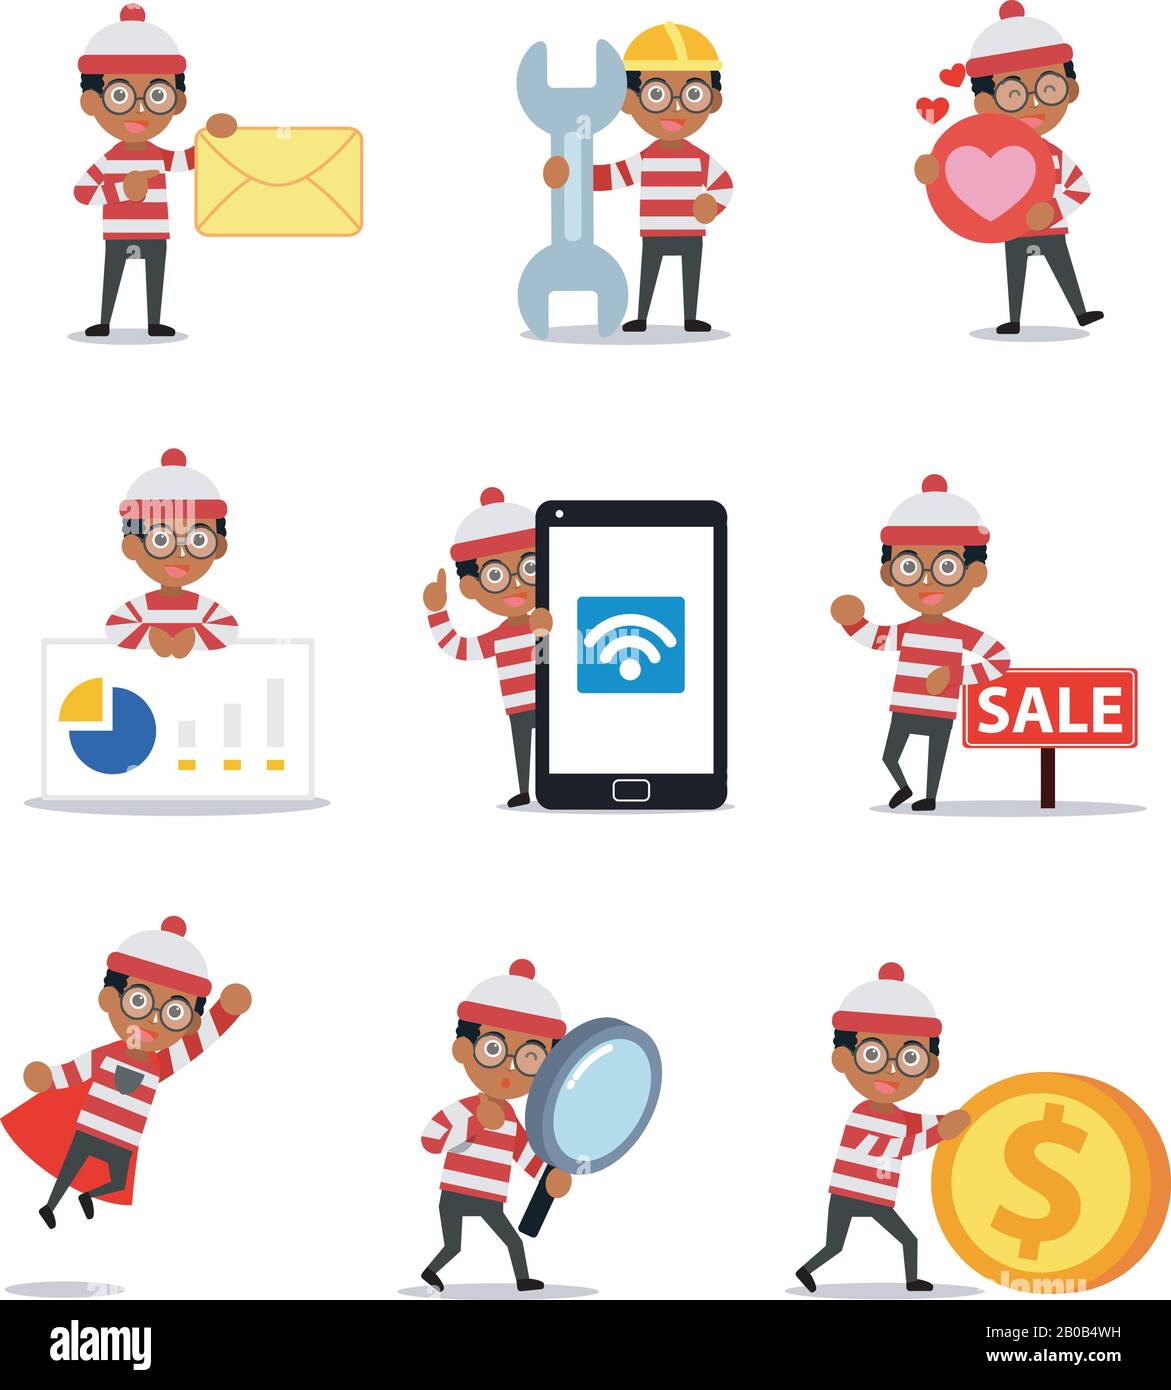 Set character of cute man in red and white striped clothes. Stock Vector